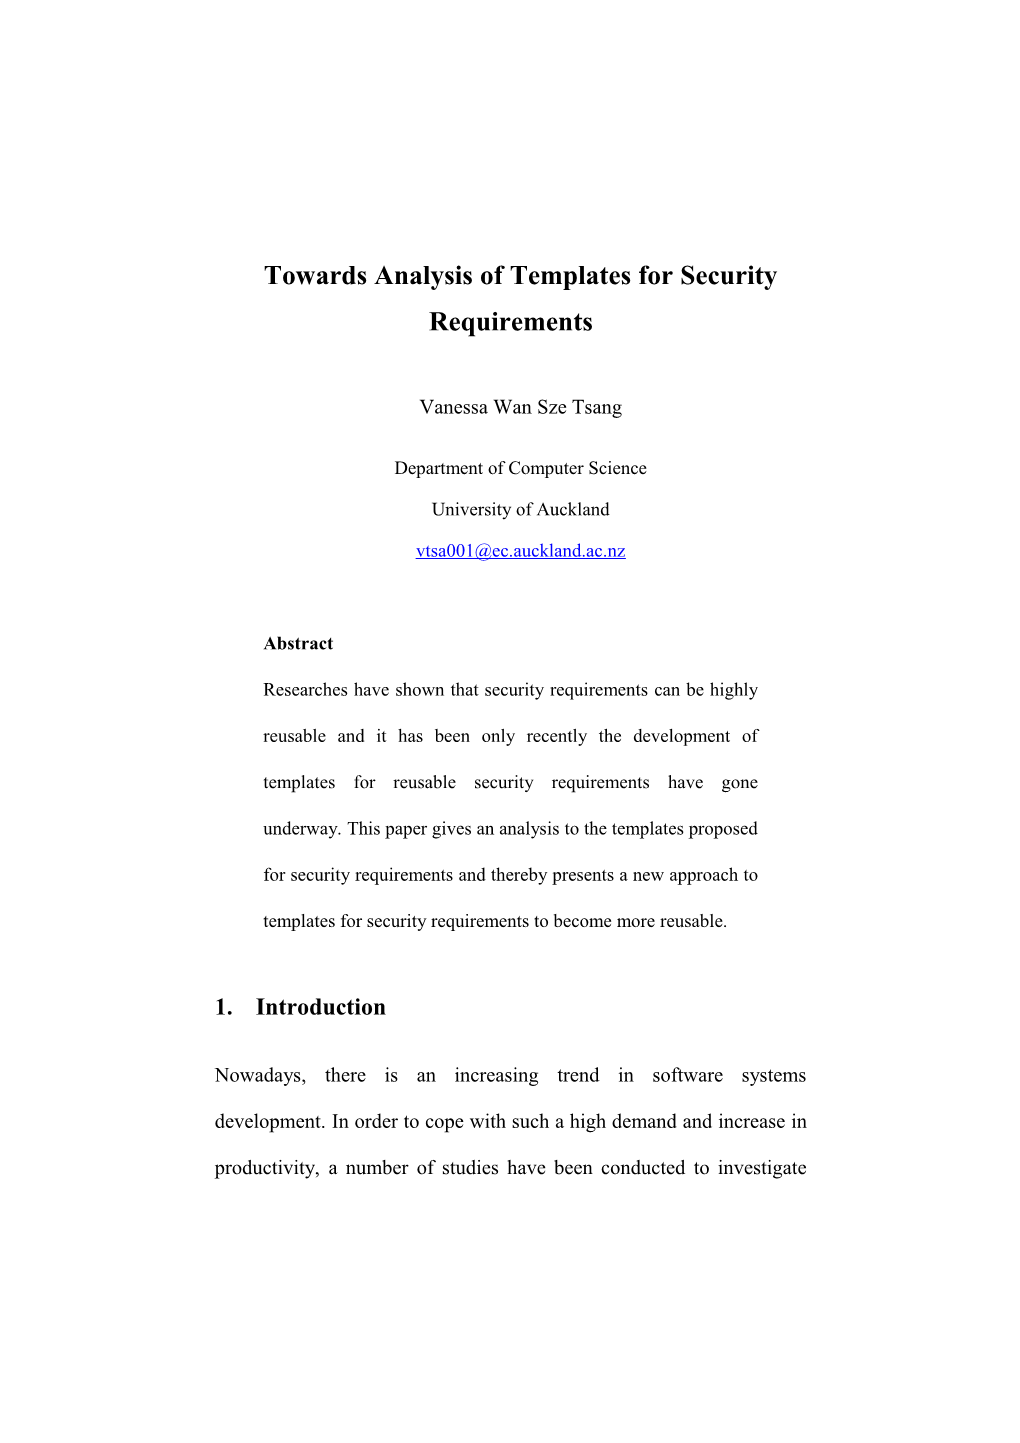 Towards Analysis of Templates for Security Requirements